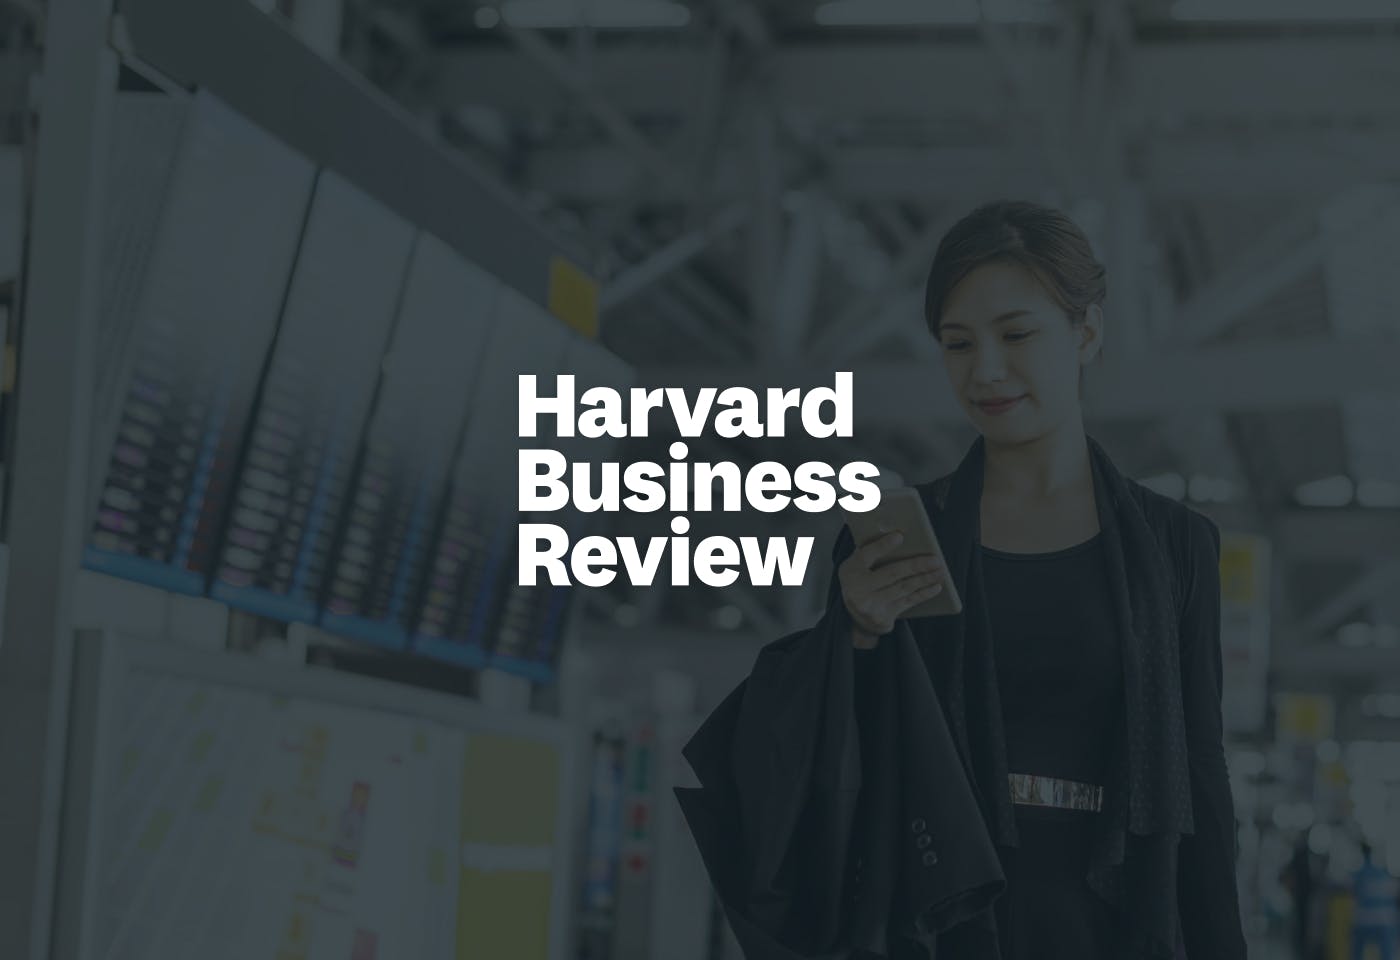 The Harvard Business Review logo overlaid over a woman holding a phone and walking through an airport.